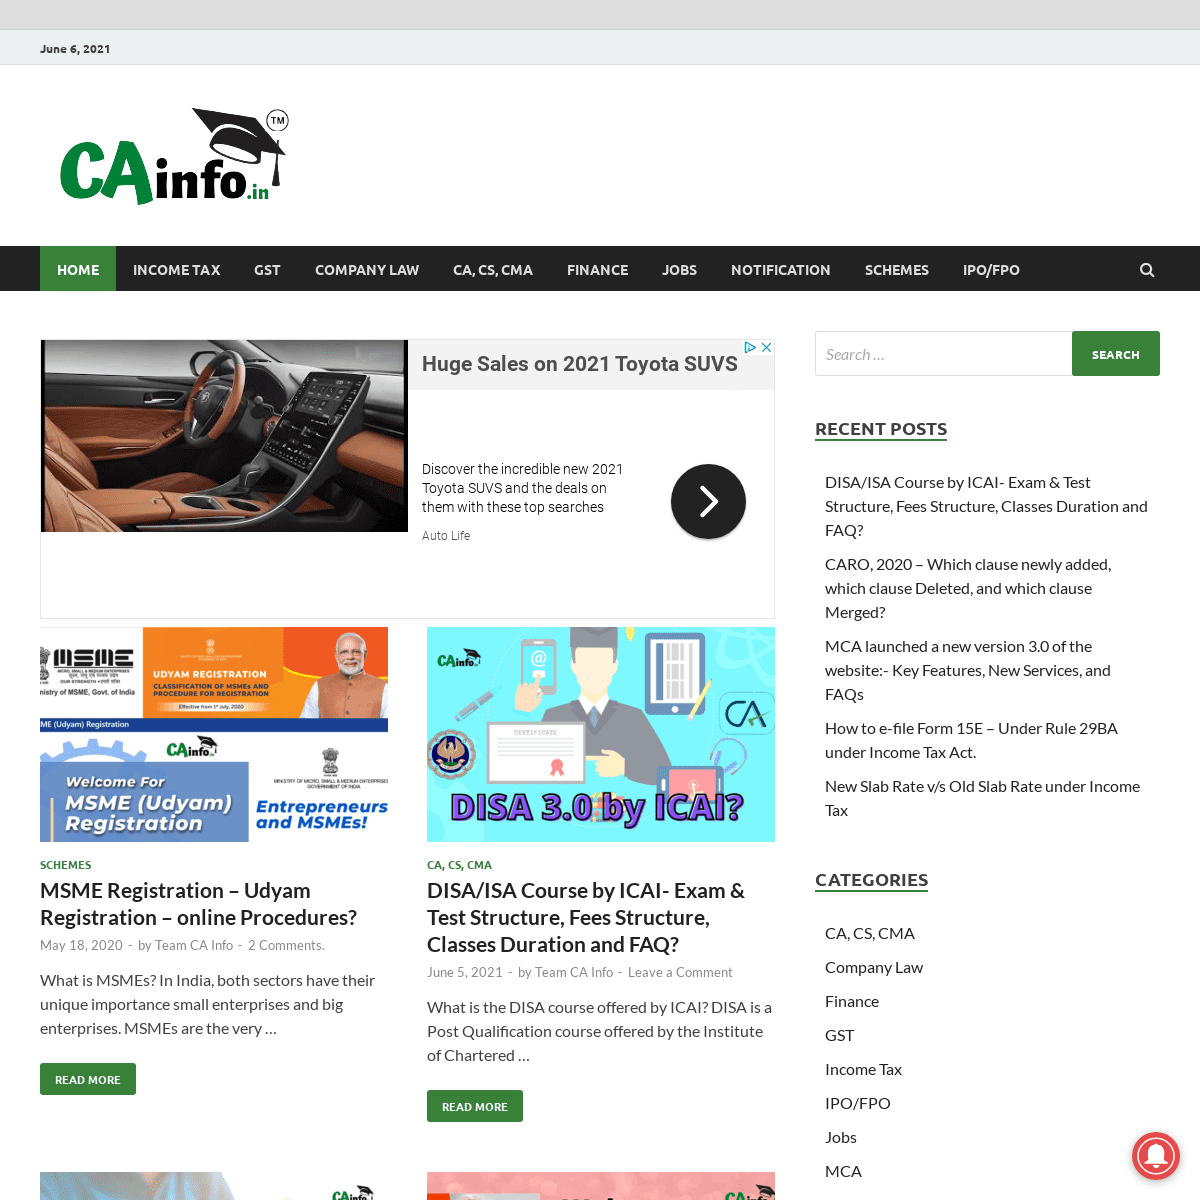 A complete backup of https://cainfo.in